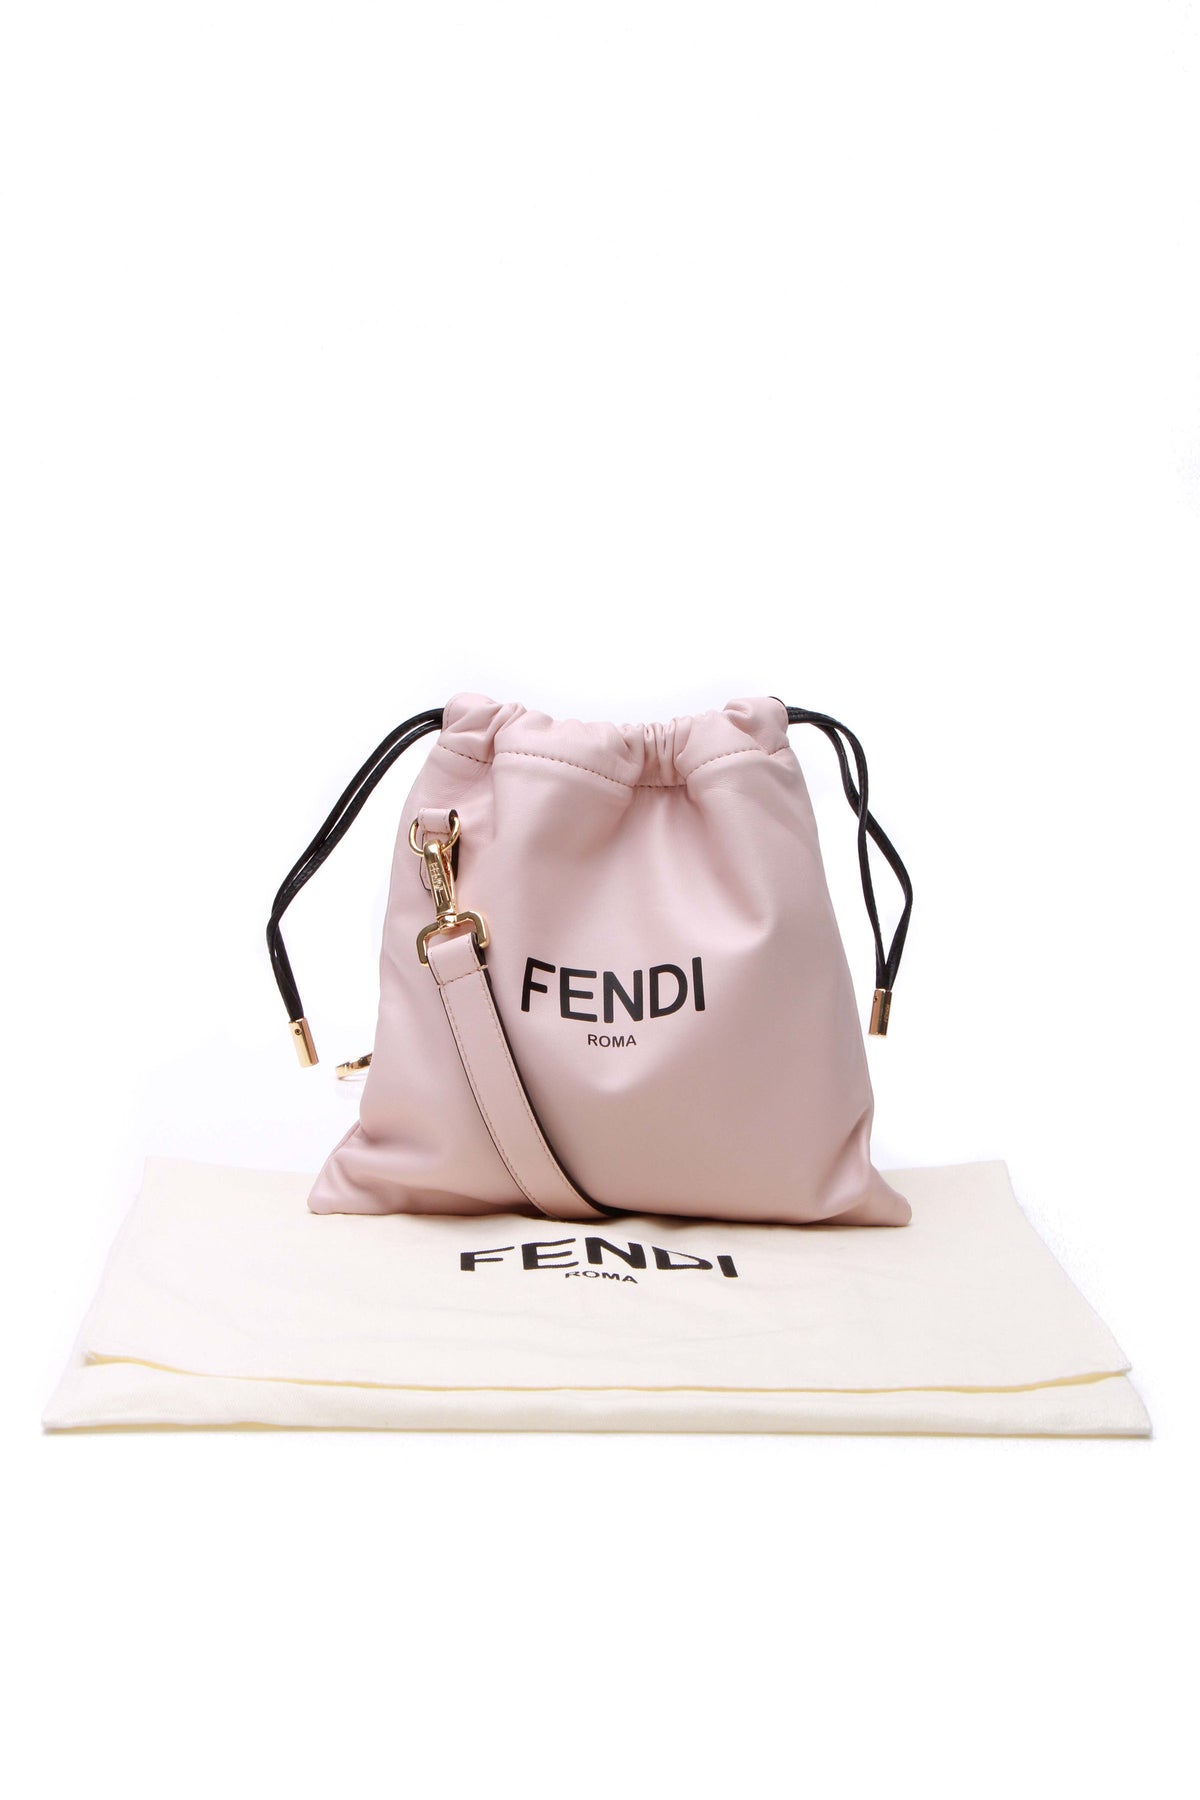 Fendi Roma Flat Pouch Large - Pink leather pouch